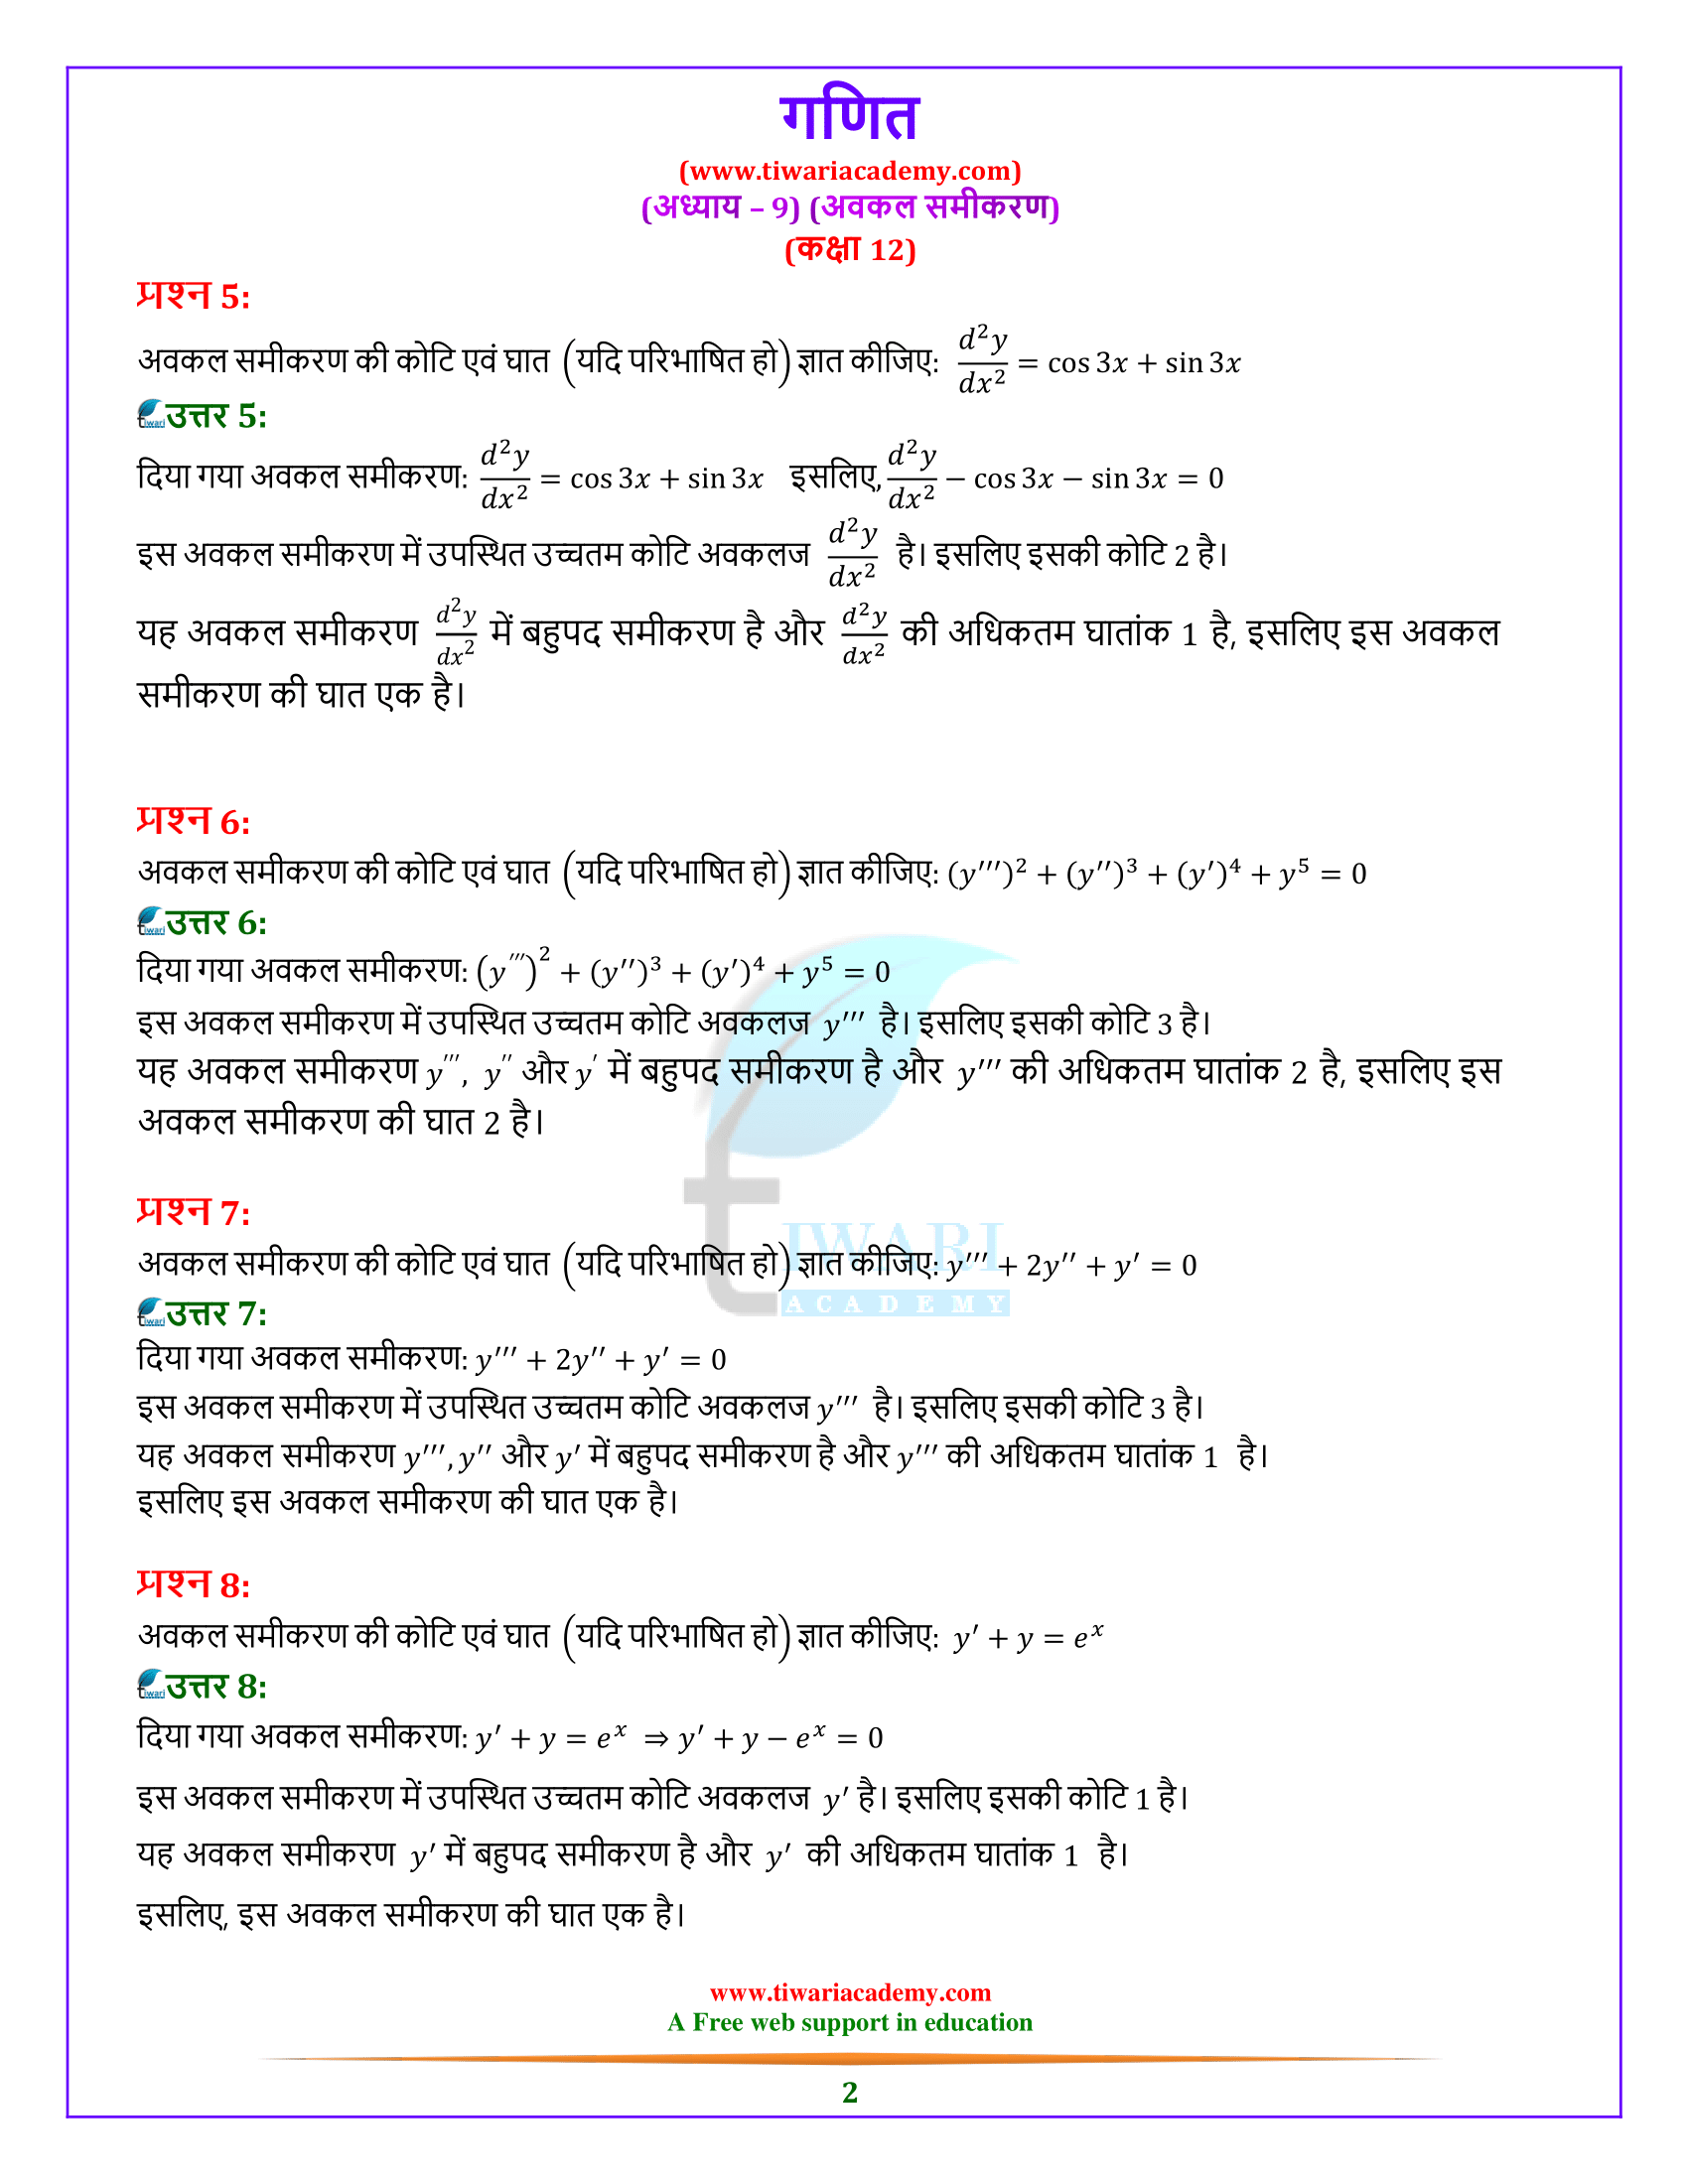 Class 12 Maths Exercise 9.1 Solutions in Hindi Medium UP Board